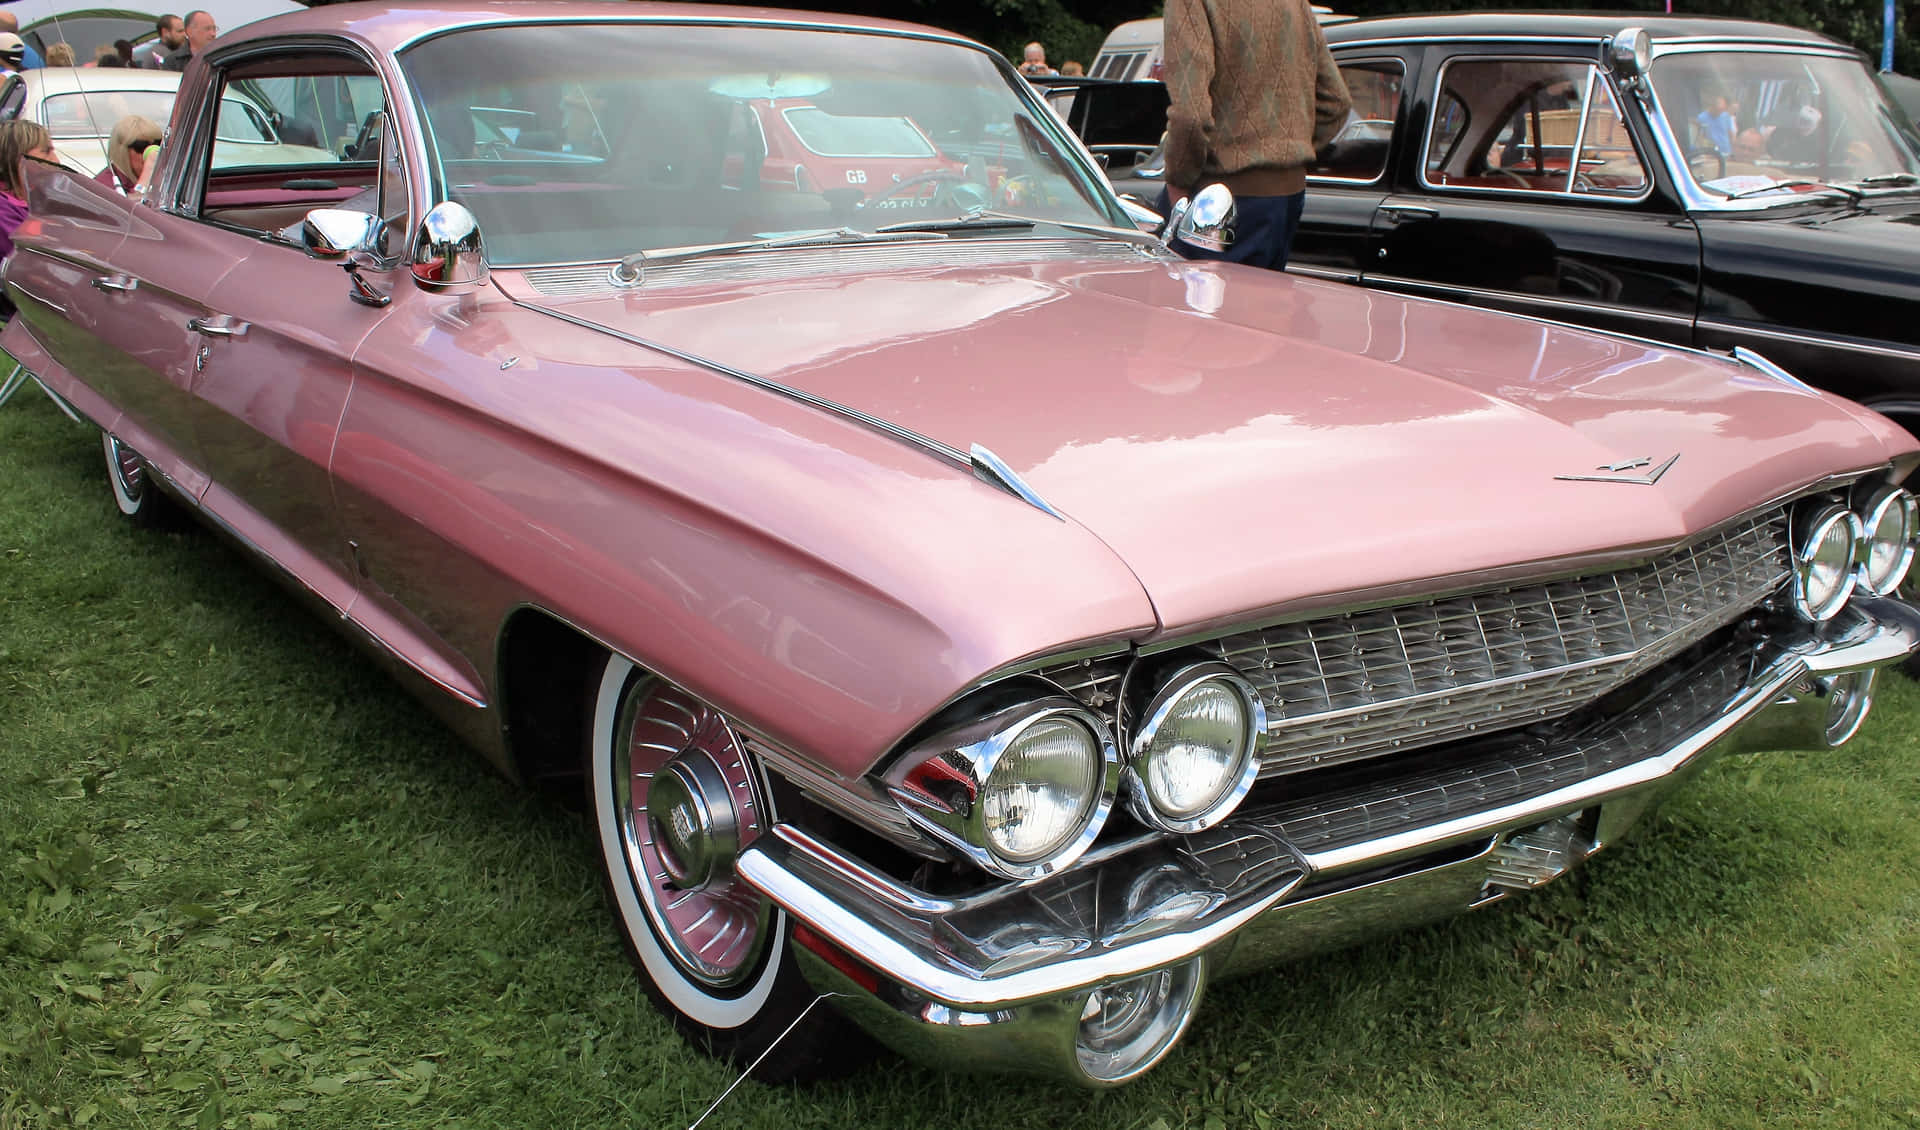 Vintage Pink Cadillac Car in a Stunning Photoshoot Wallpaper